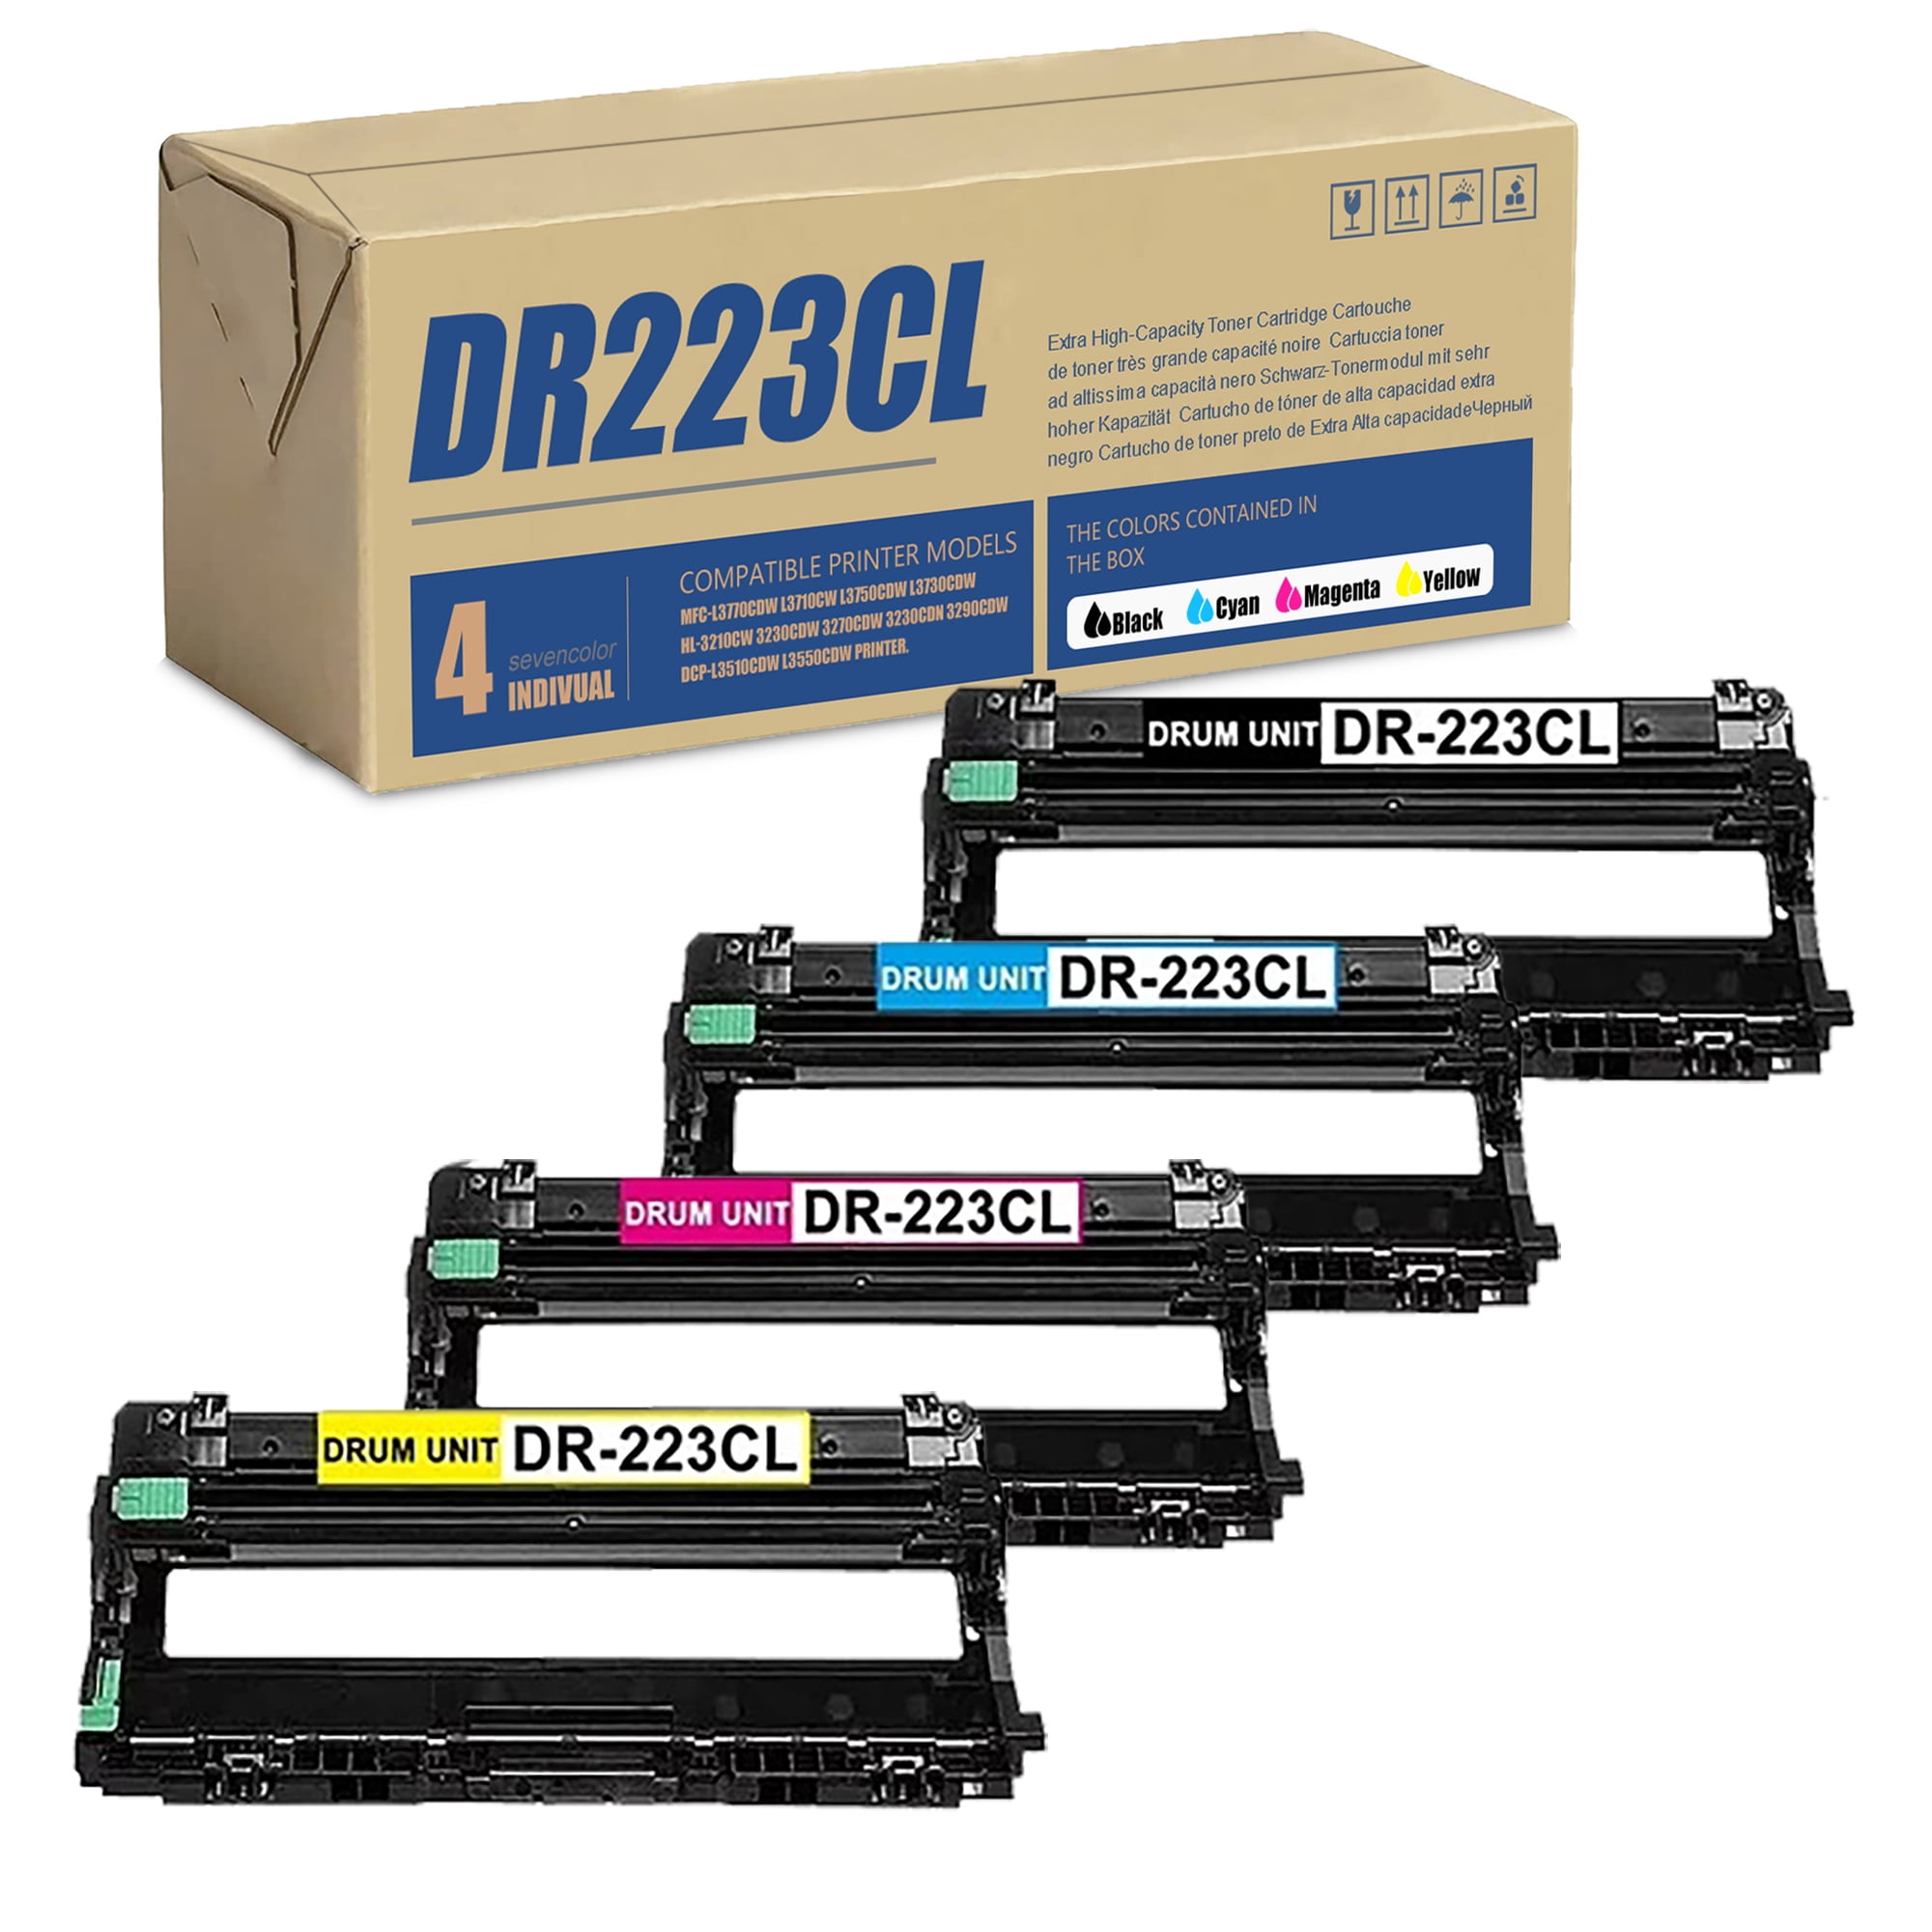 4 Pack DR-223CL Drum Unit Replacement for Brother MFC-L3770CDW  Printer(1BK/1C/1M/1Y,Toner is not Included).